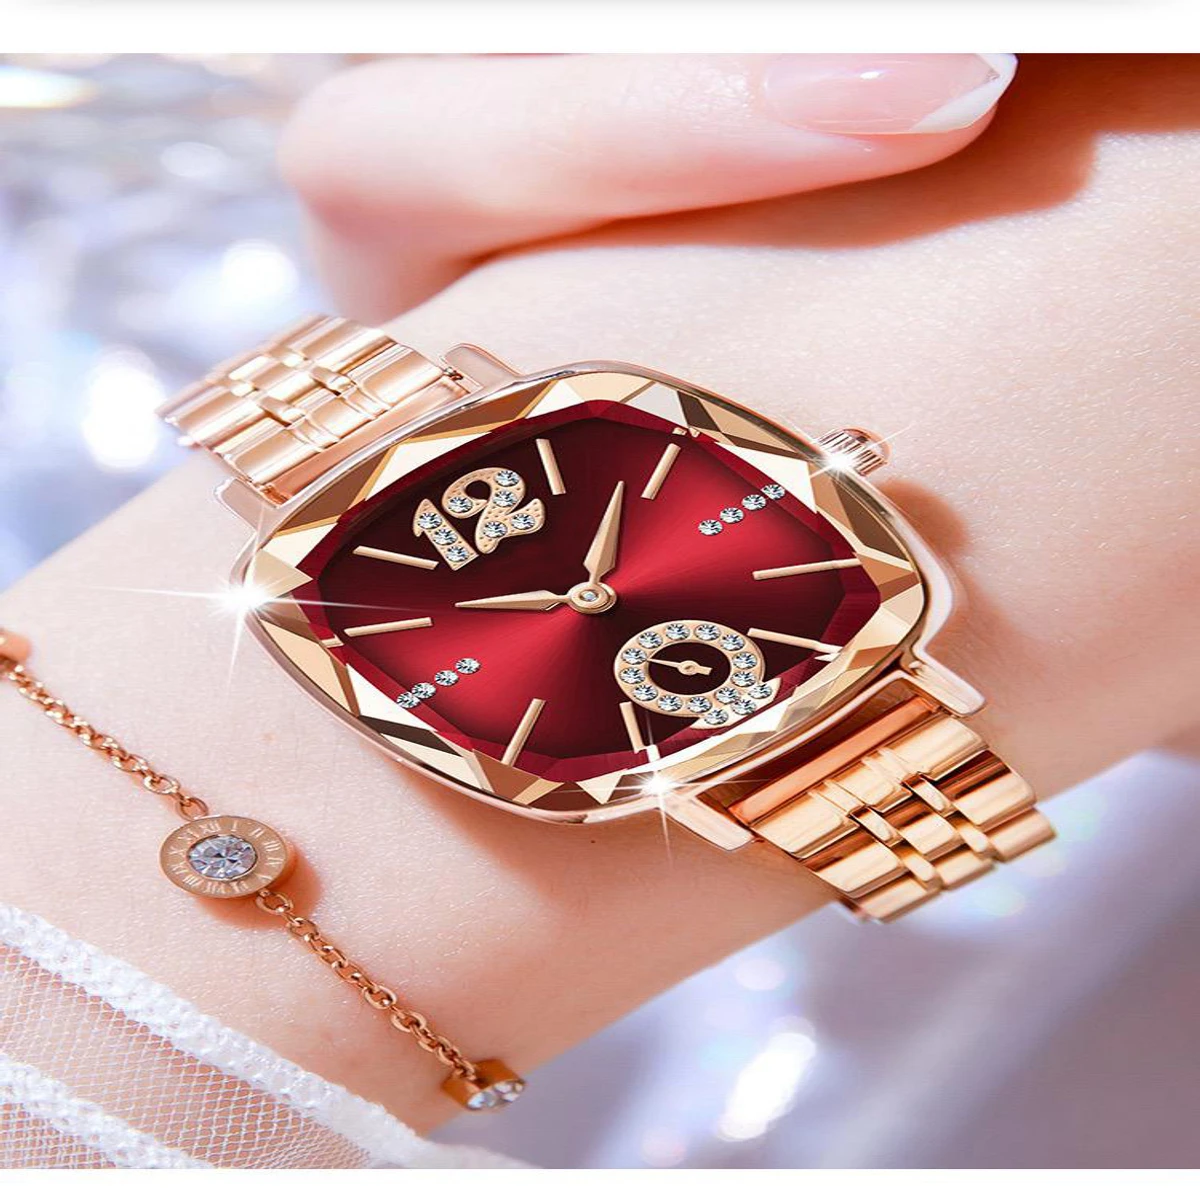 CRRJU Waterproof Ladies Wristwatch with Sparkling Rhinestone Dial and Stainless Steel Band- Golden Red